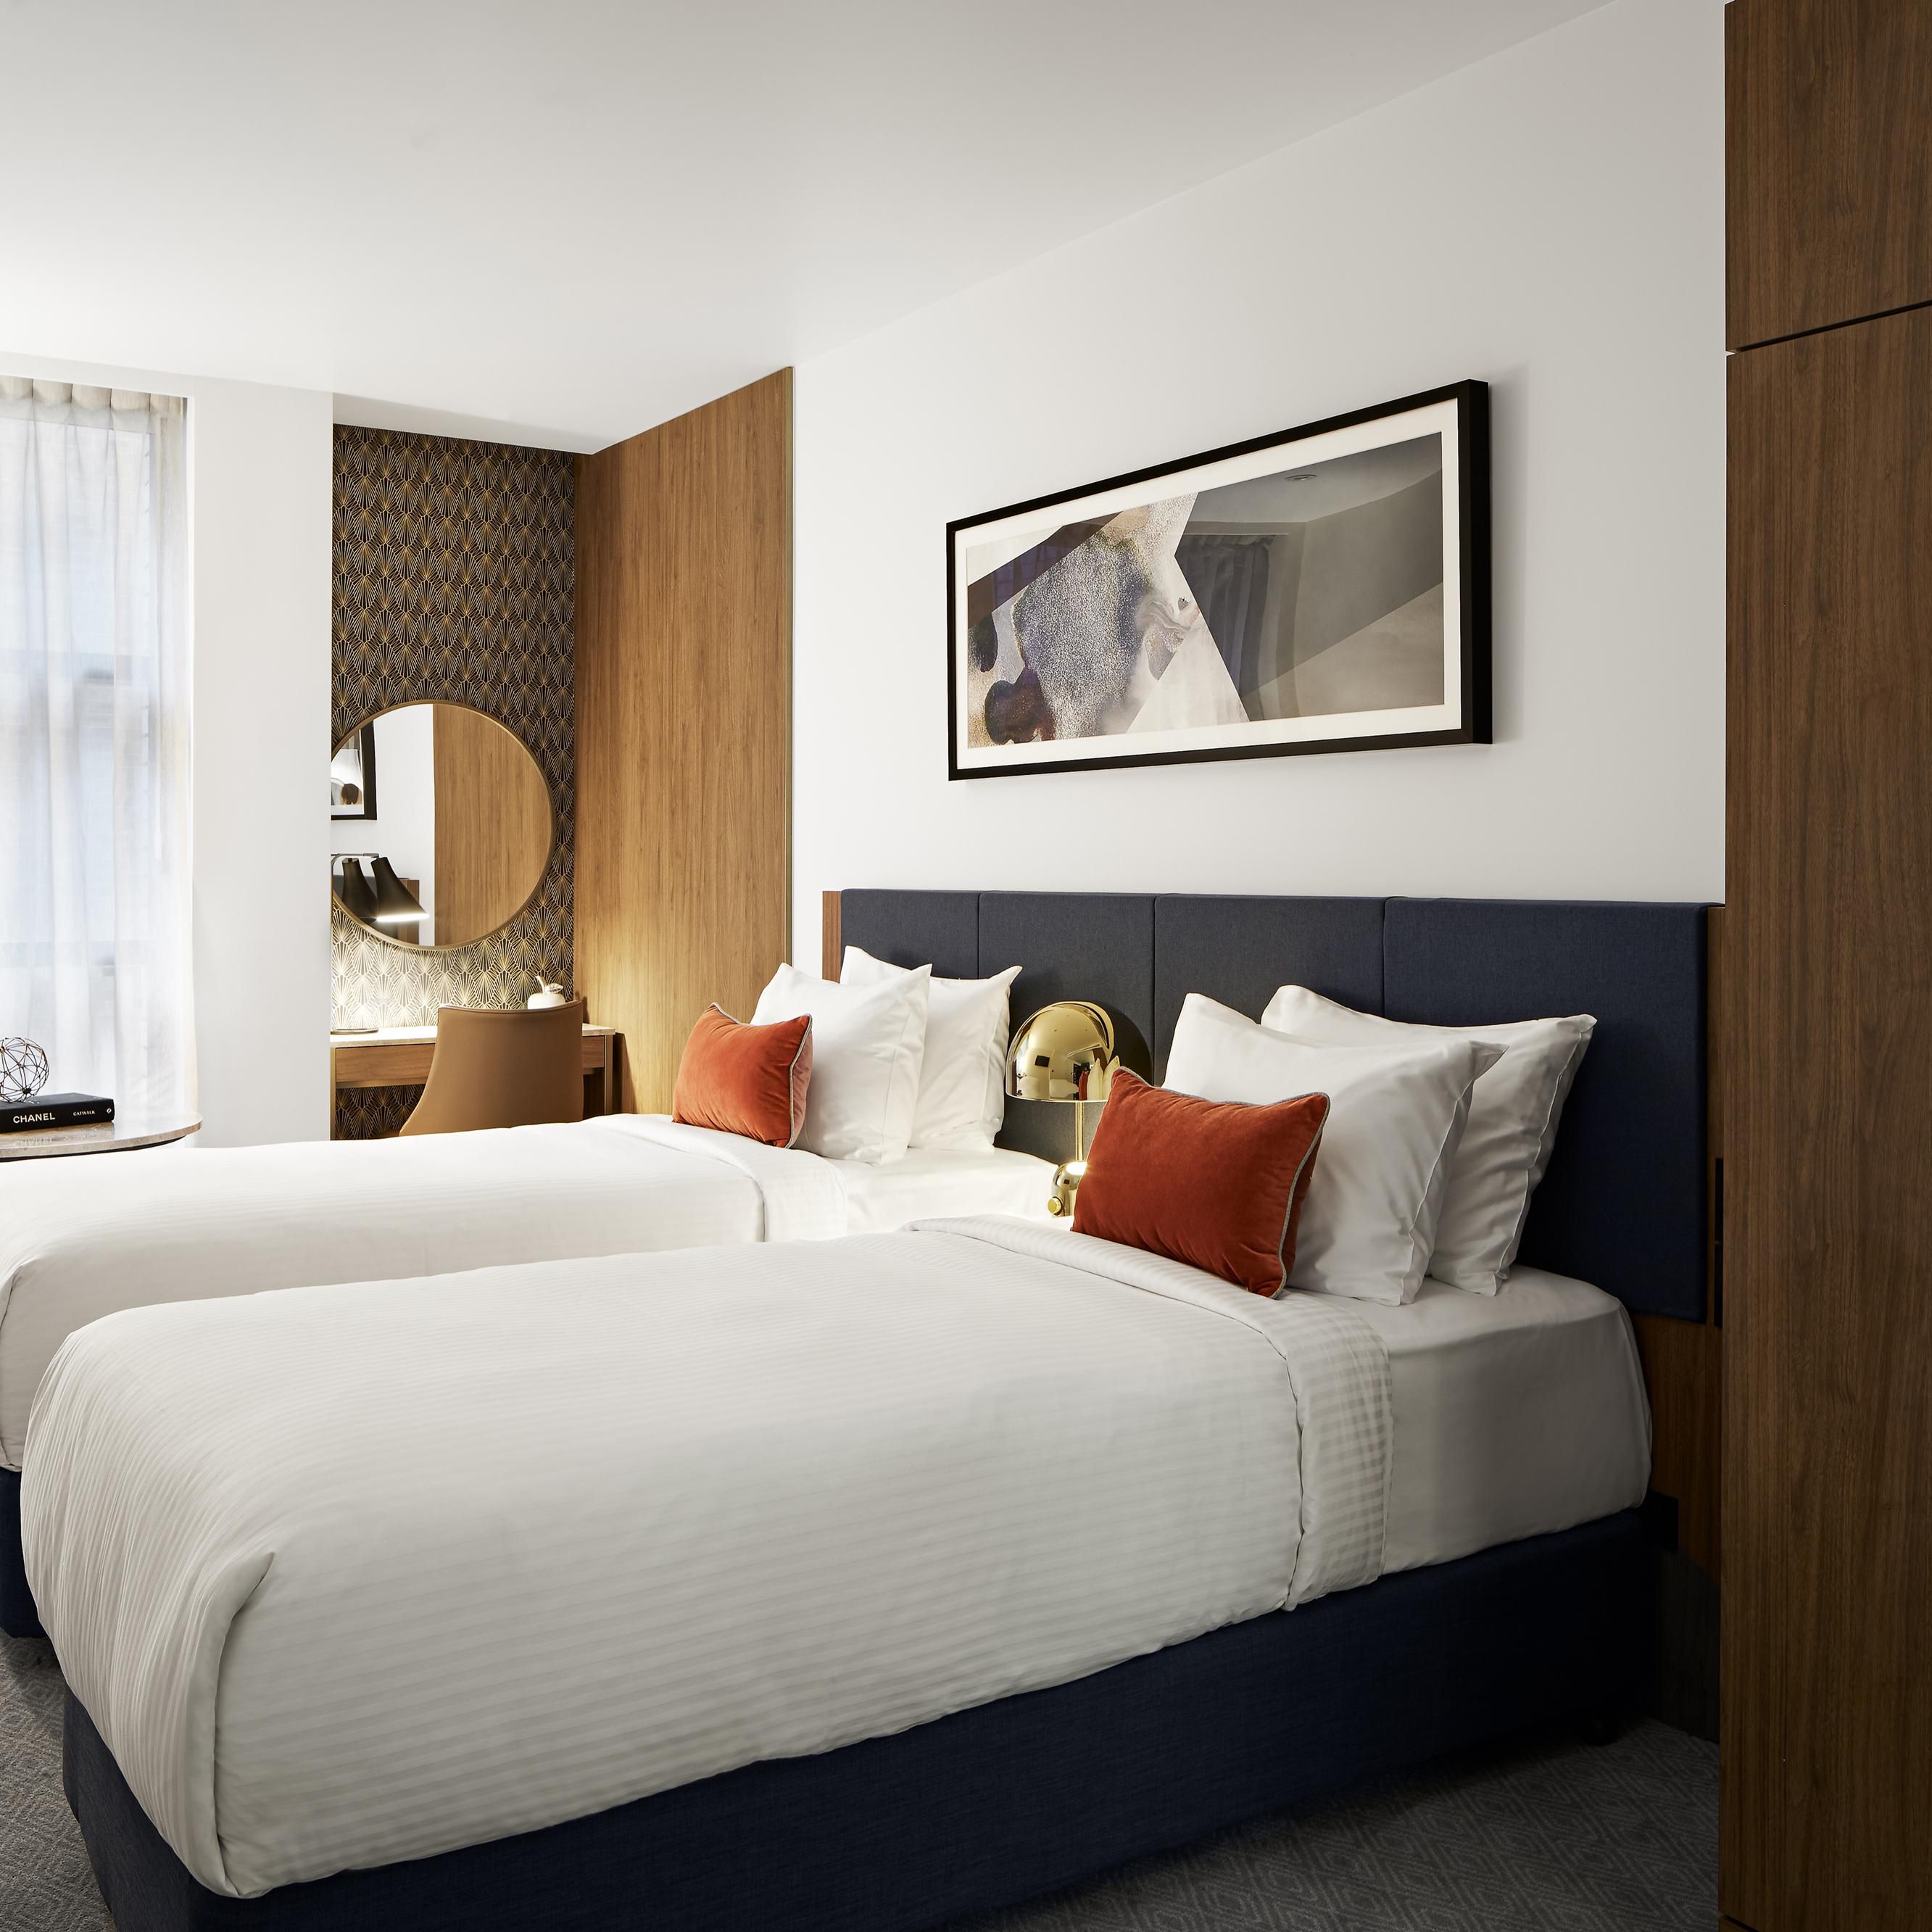 Standard guest rooms with the choice of king or twin configuration